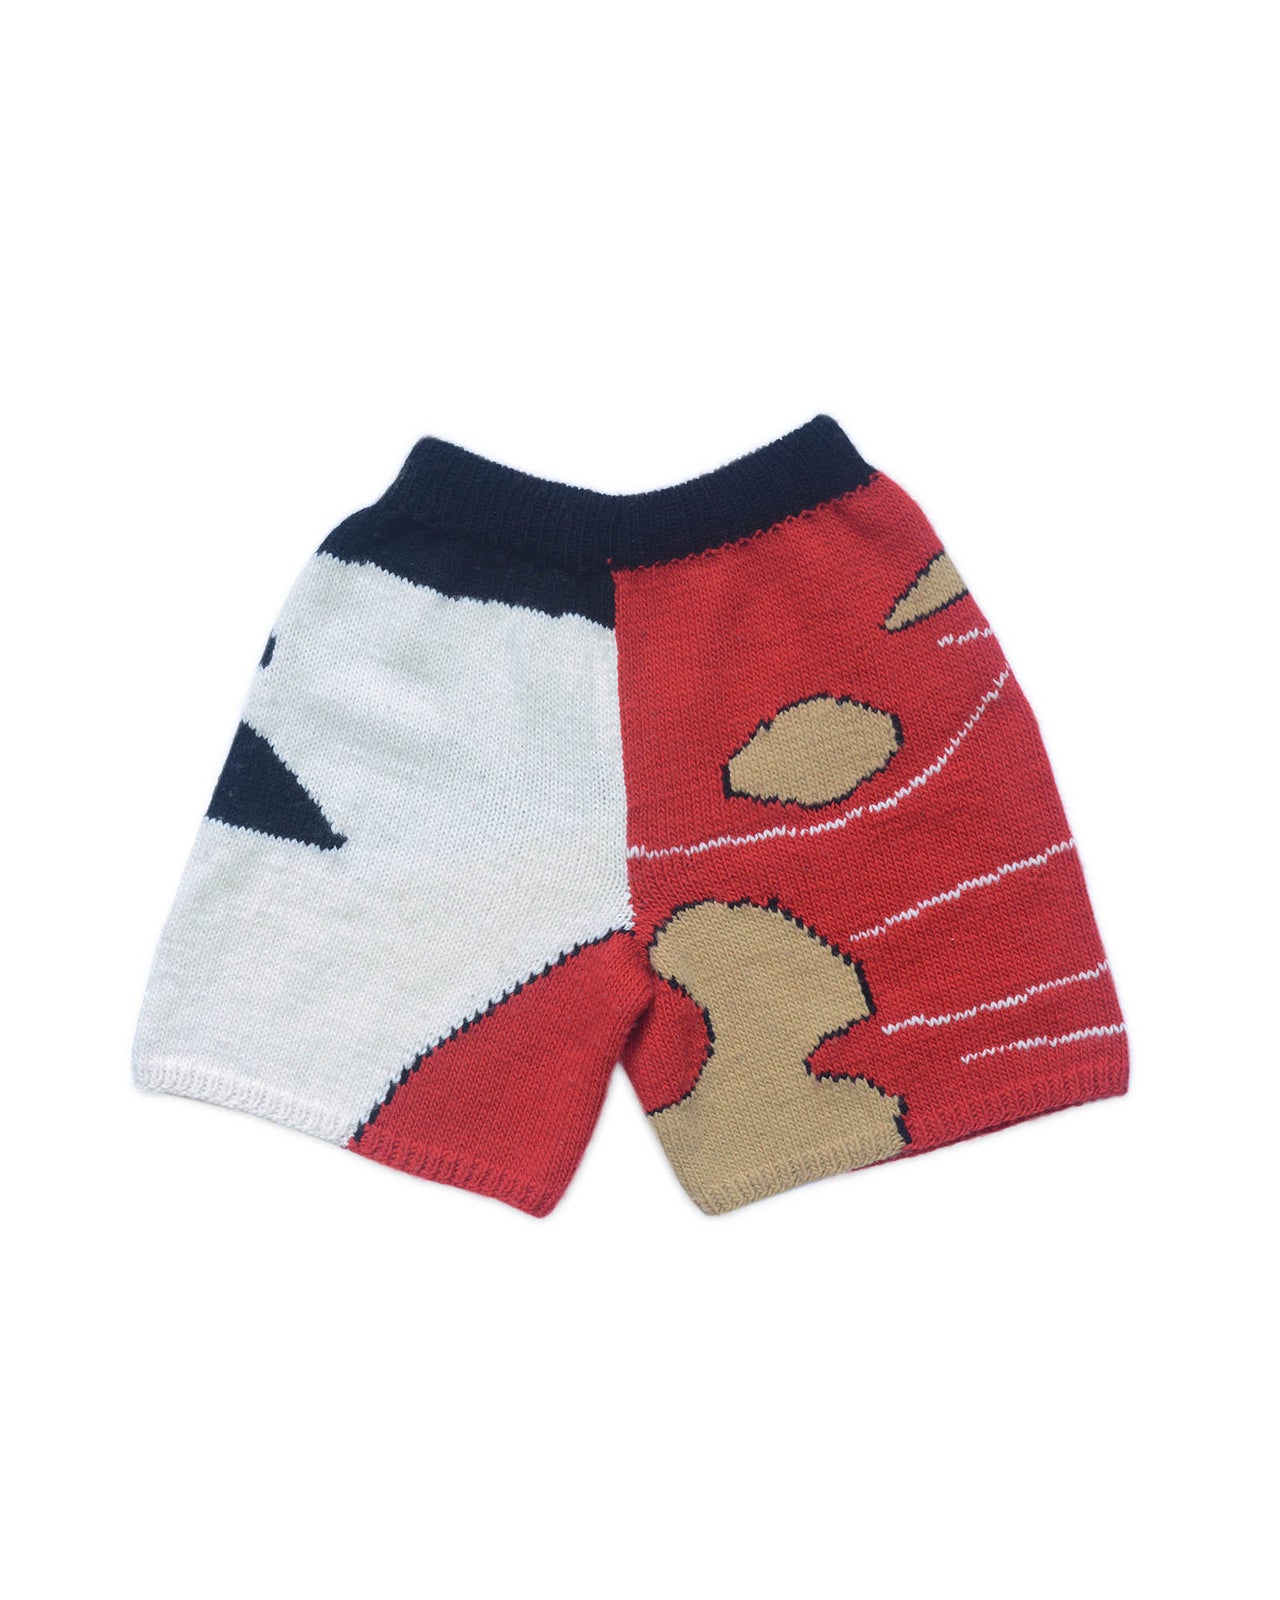 Back of wool bermudas on white background. Red, white, beige and black colour block patterns decorate the bermuda shorts. 